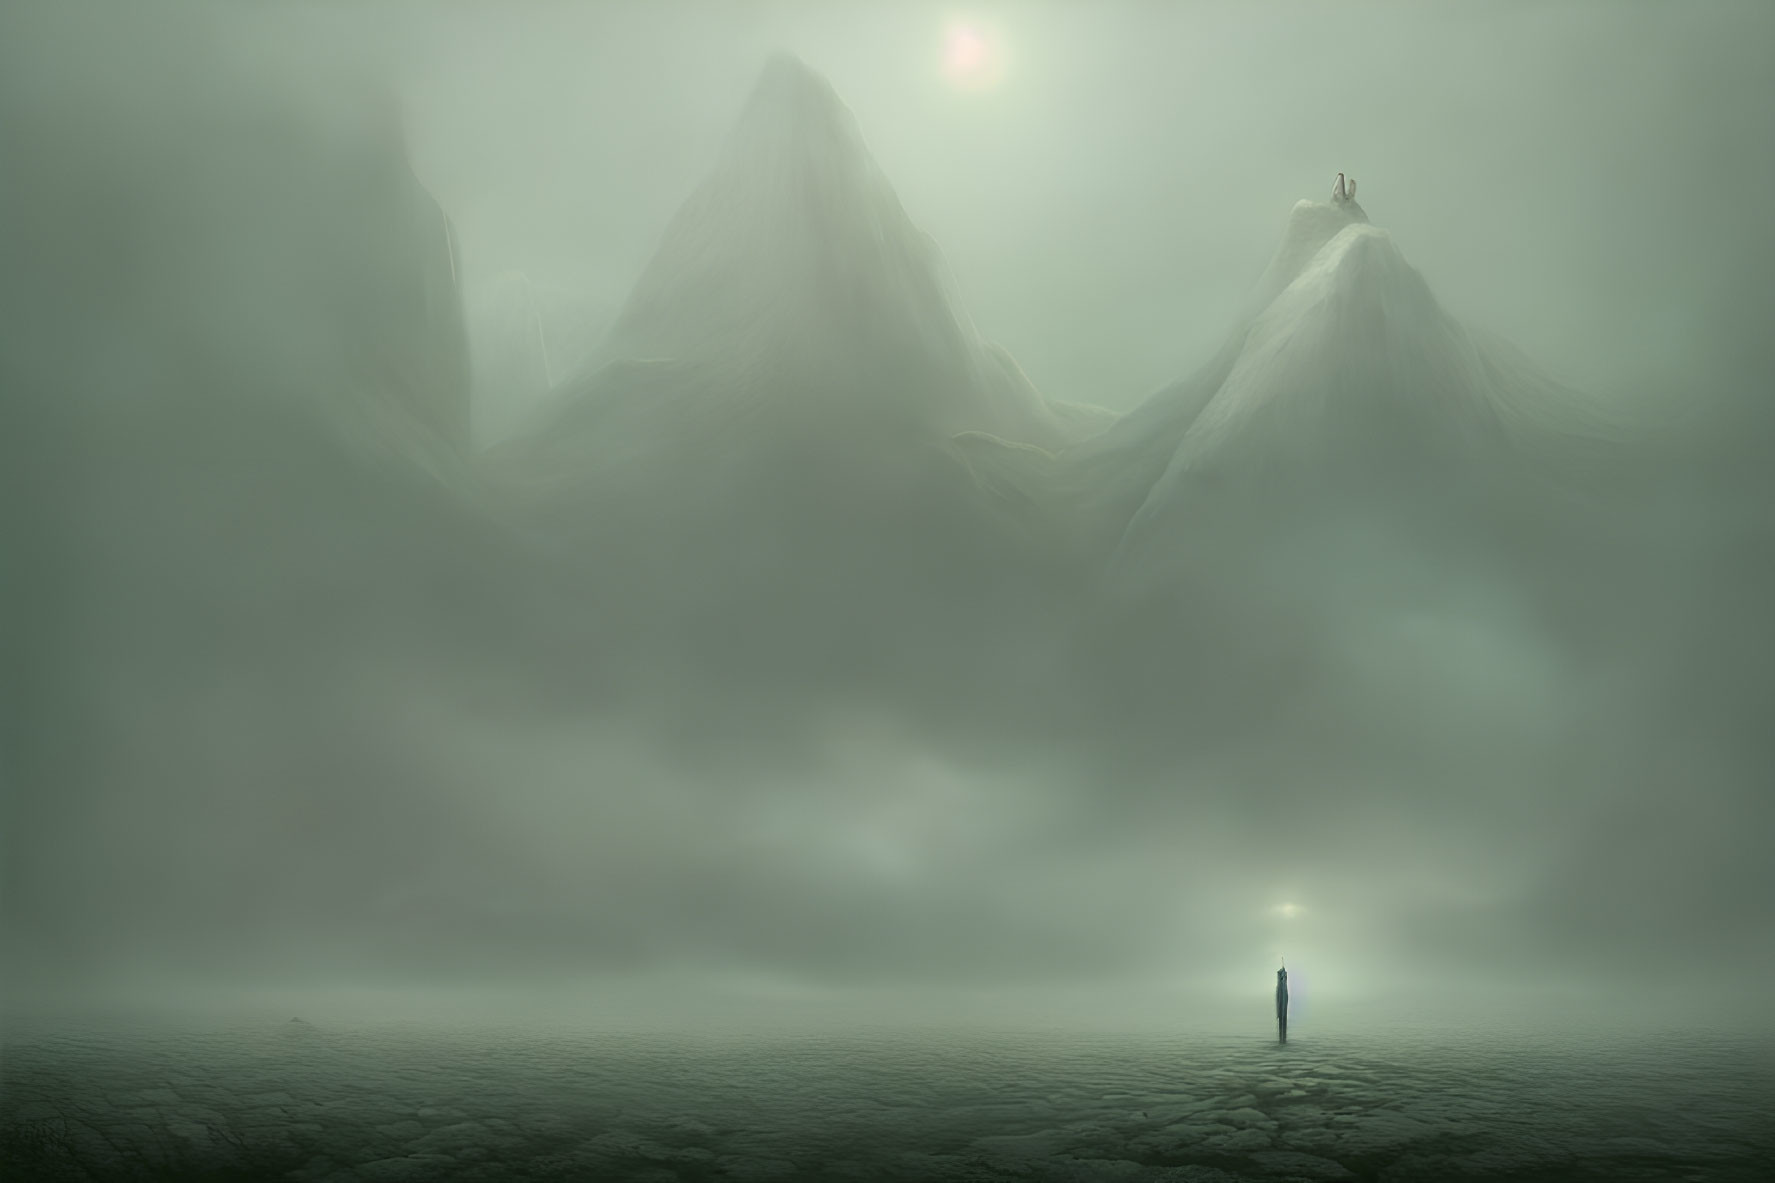 Misty landscape with cracked ground, lone figure, mountains, and dim sun